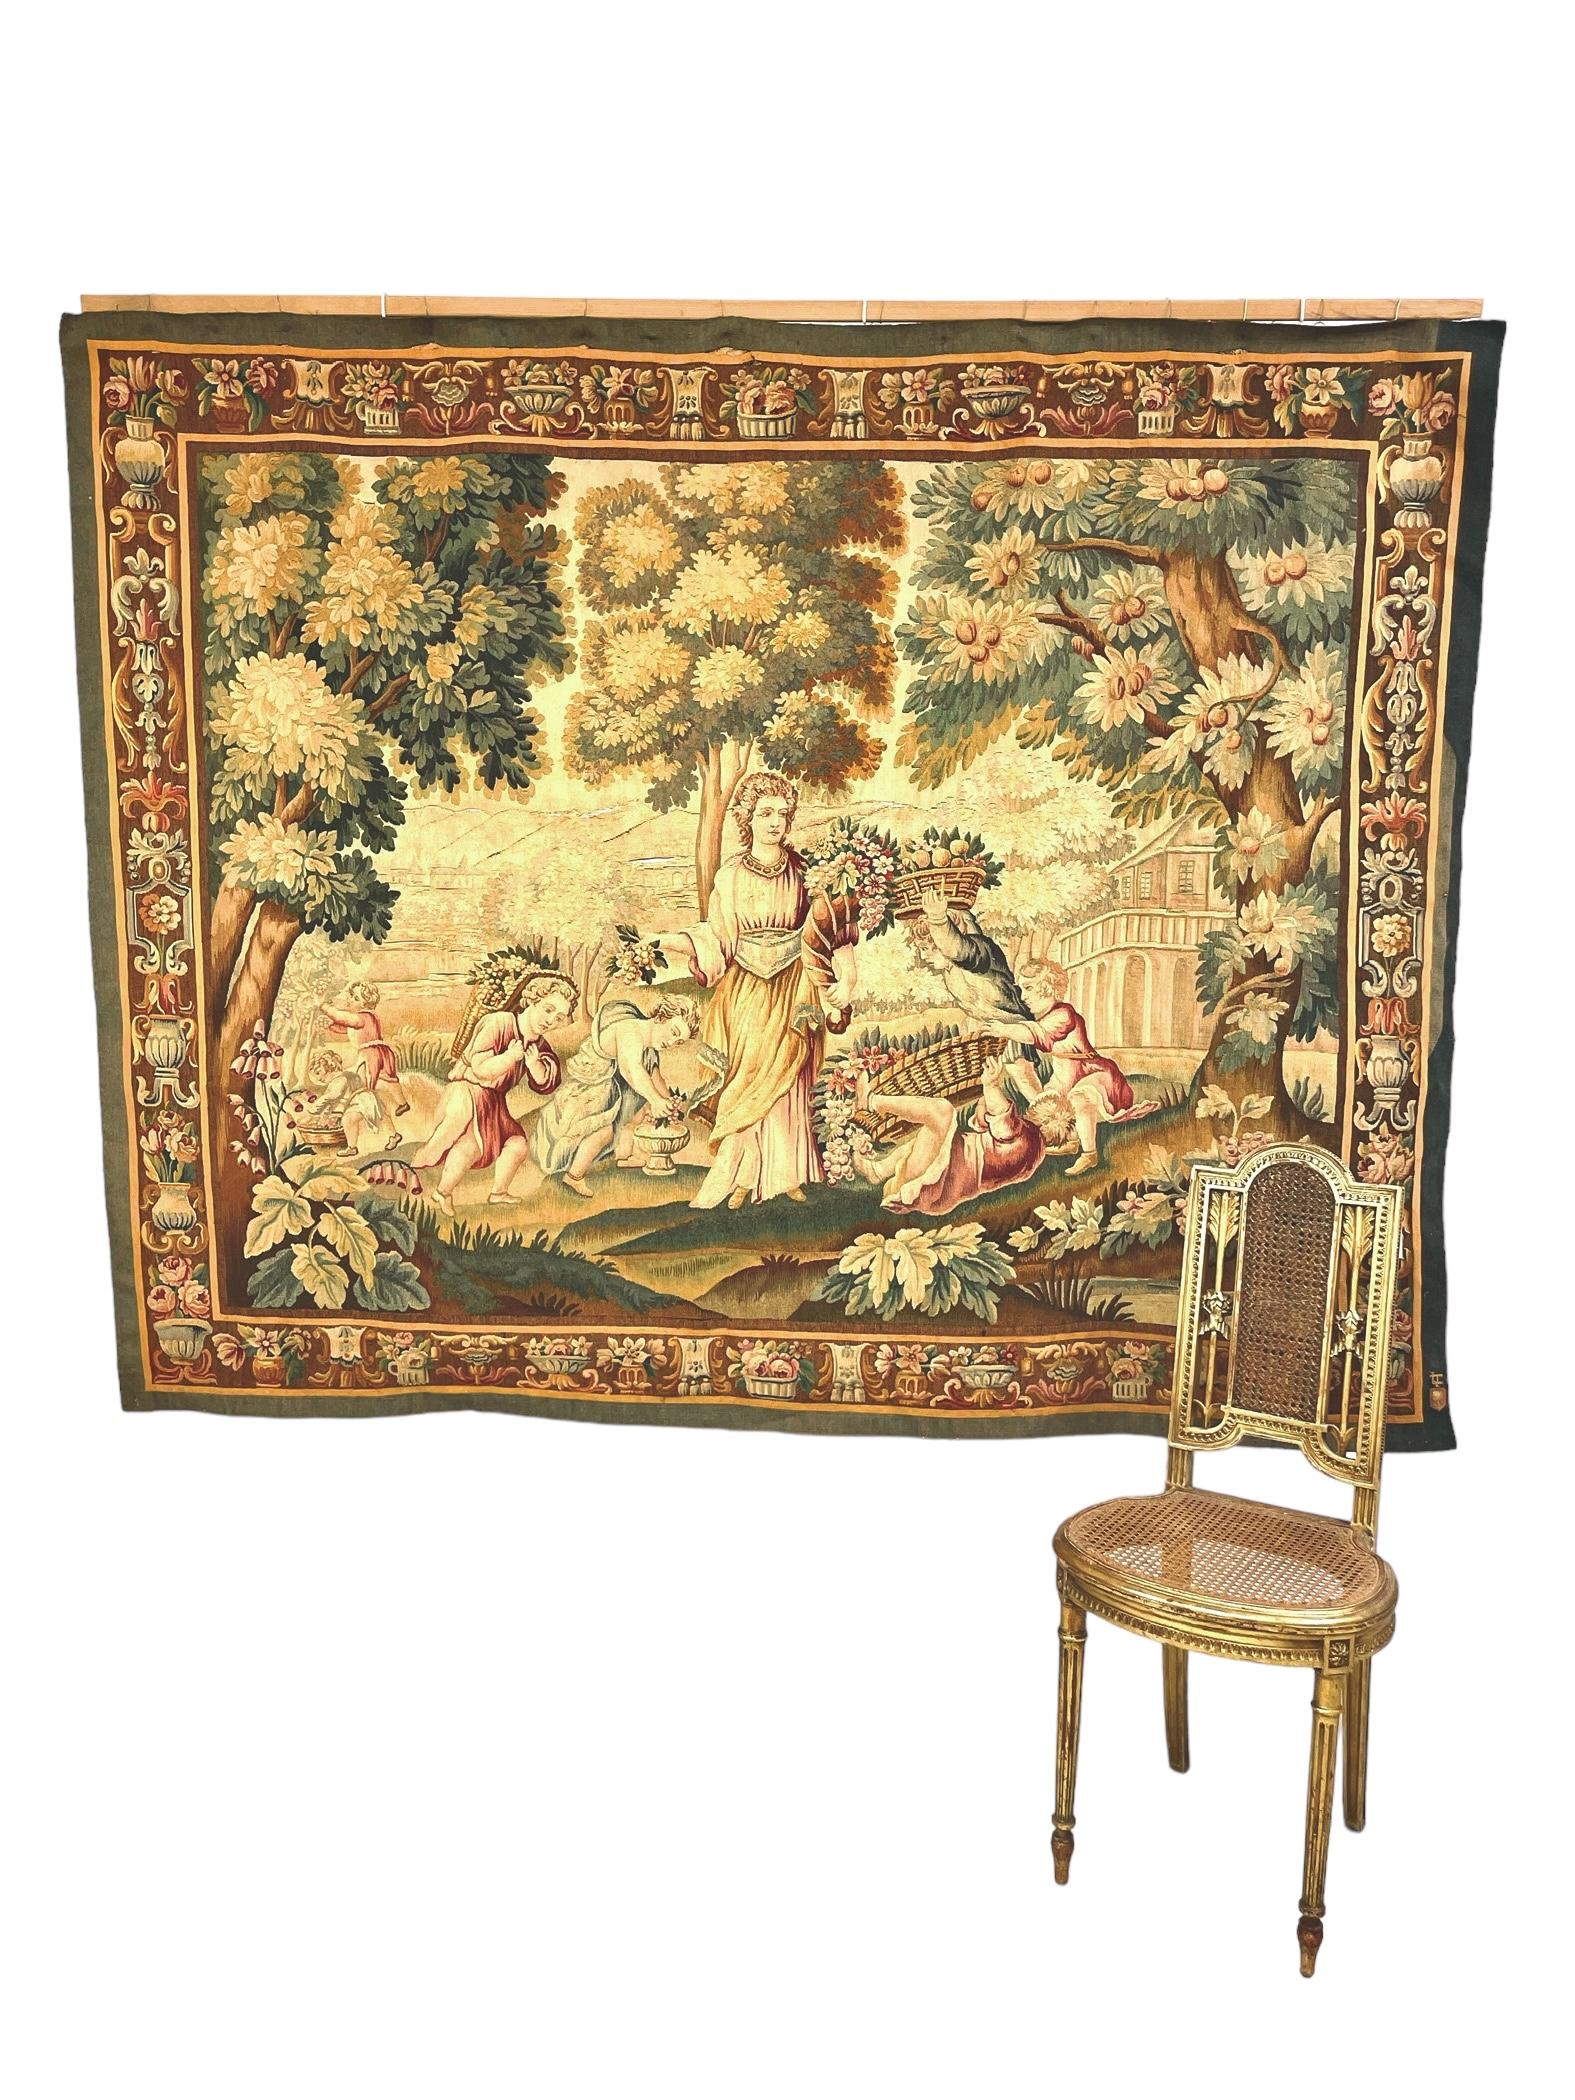 A fine Aubusson tapestry depicting a robed lady and several mischievous children bearing baskets of fruit, in a typically rural and architectural-themed landscape. A wide border on all four sides is densely decorated with flower-filled urns and